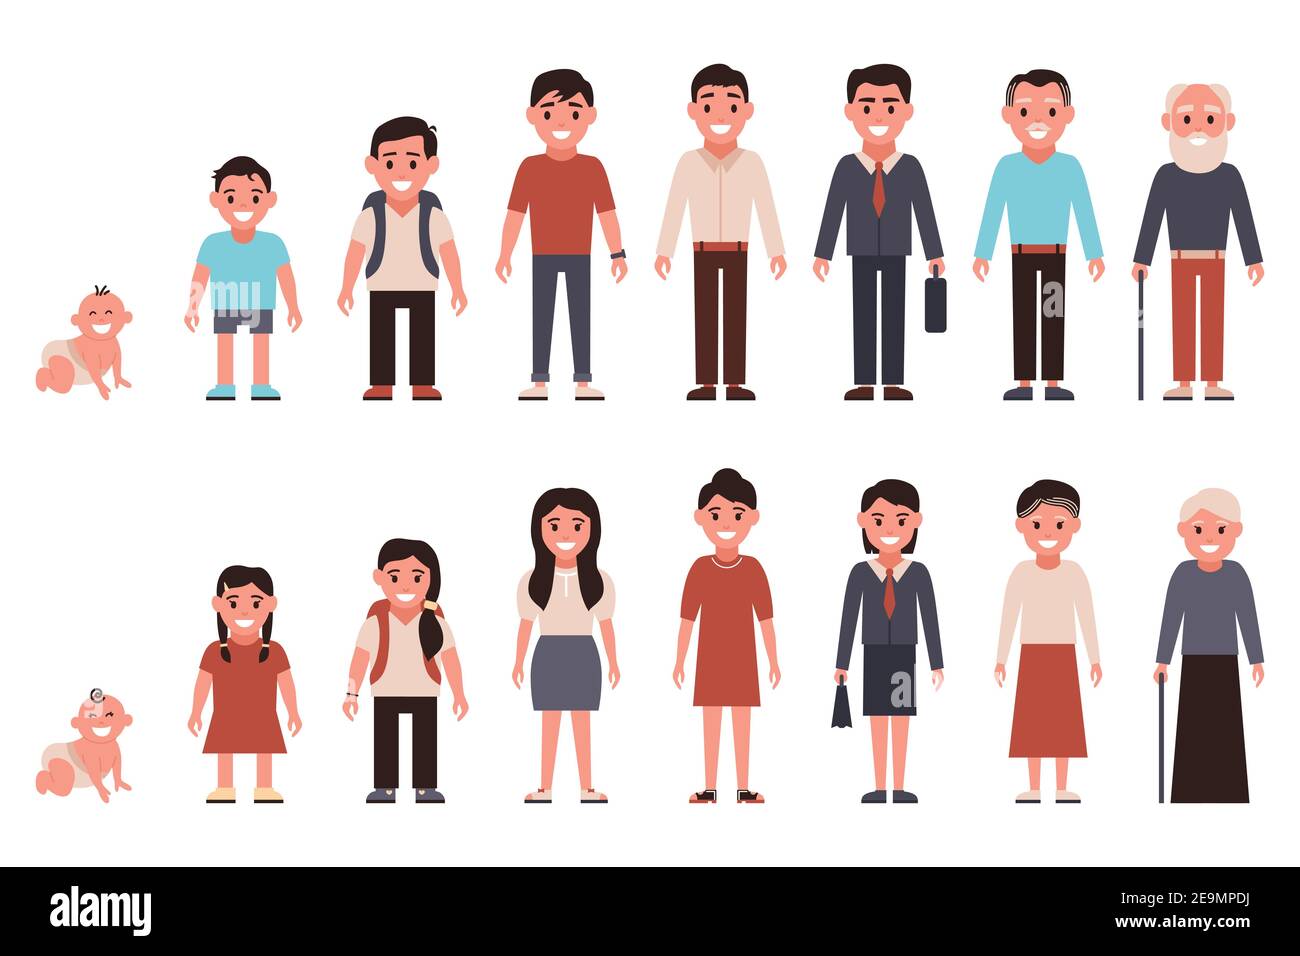 Set Of Growing Up Evolution On White Background. All The Stages Of Growing  Up From Baby To Old Men. Age Stages. Royalty Free SVG, Cliparts, Vetores, e  Ilustrações Stock. Image 60196843.